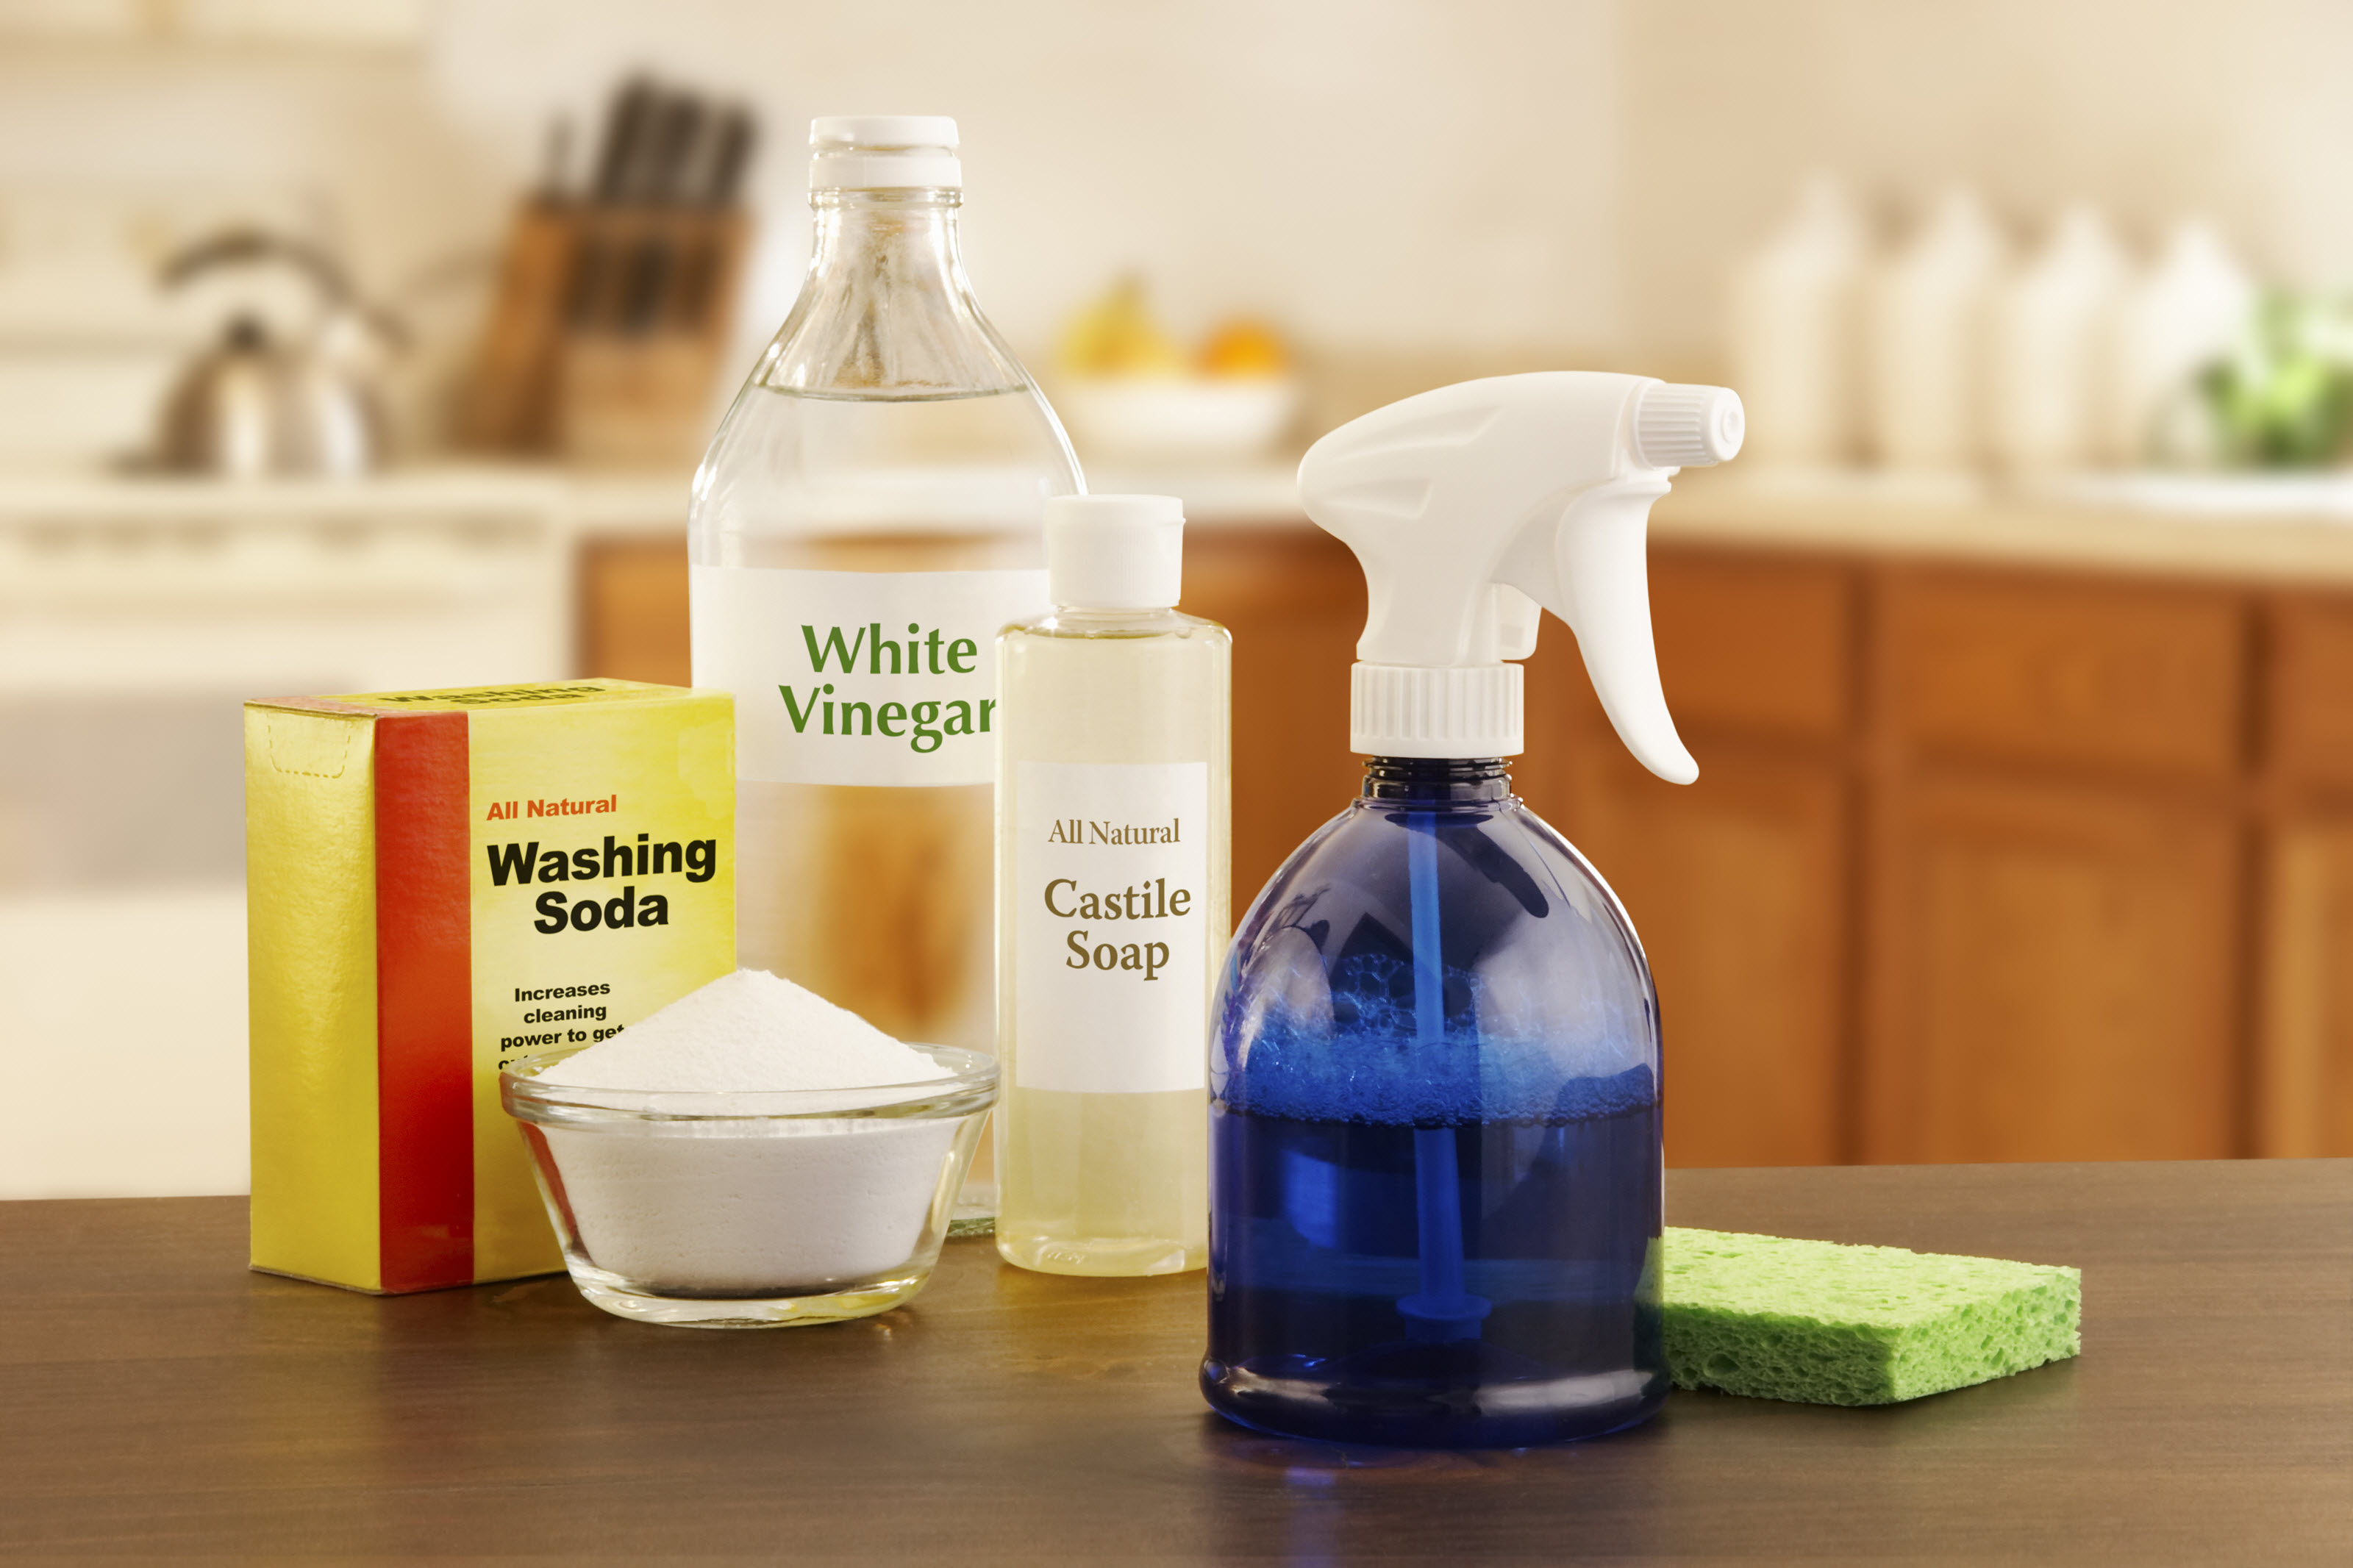 One Clean Eco-Friendly Kitchen Cleaner - 1 Gallon Bottle 